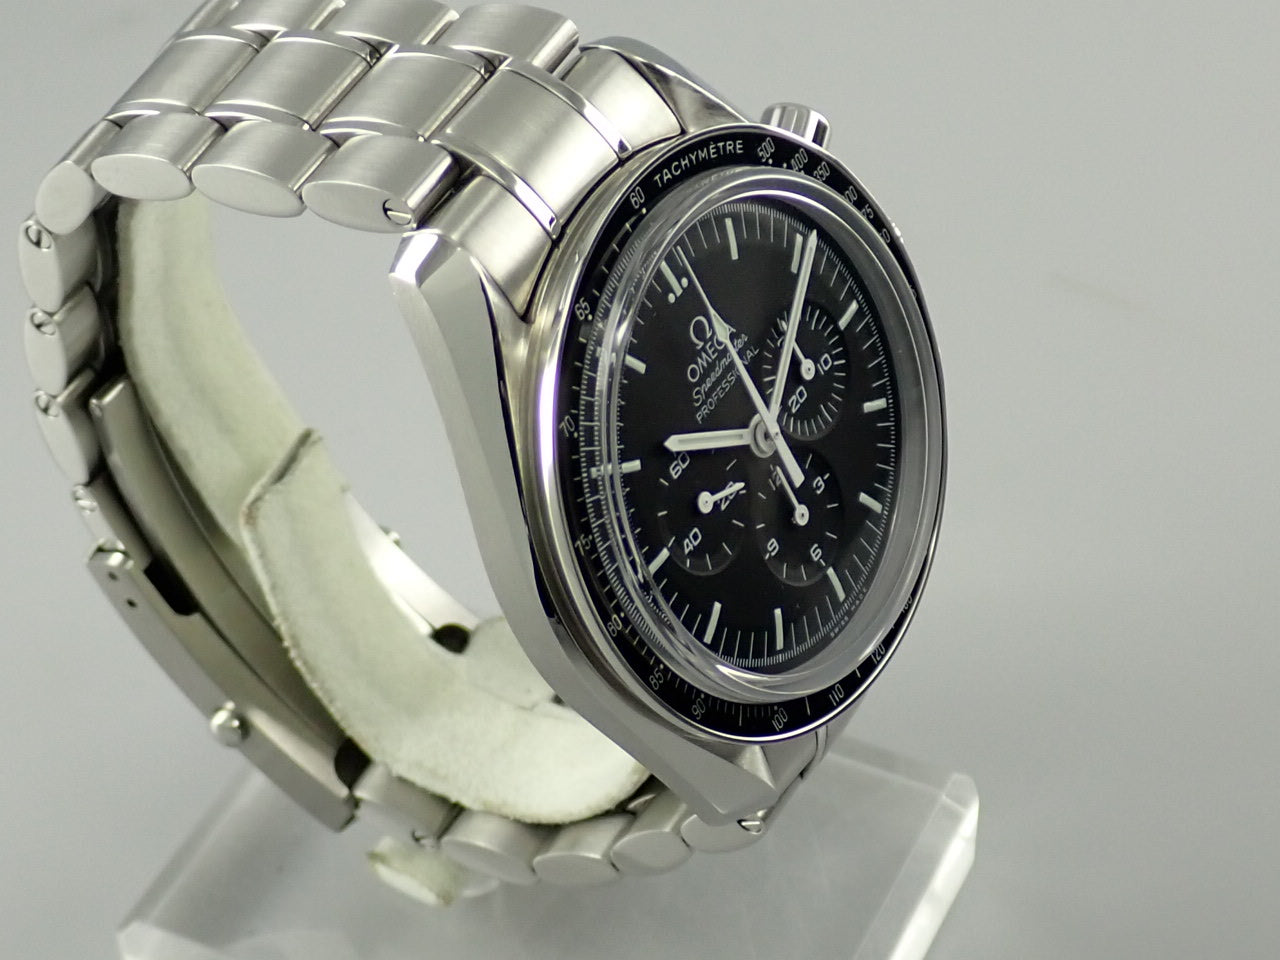 Omega Speedmaster Moonwatch Professional &lt;Warranty Box and Others&gt;